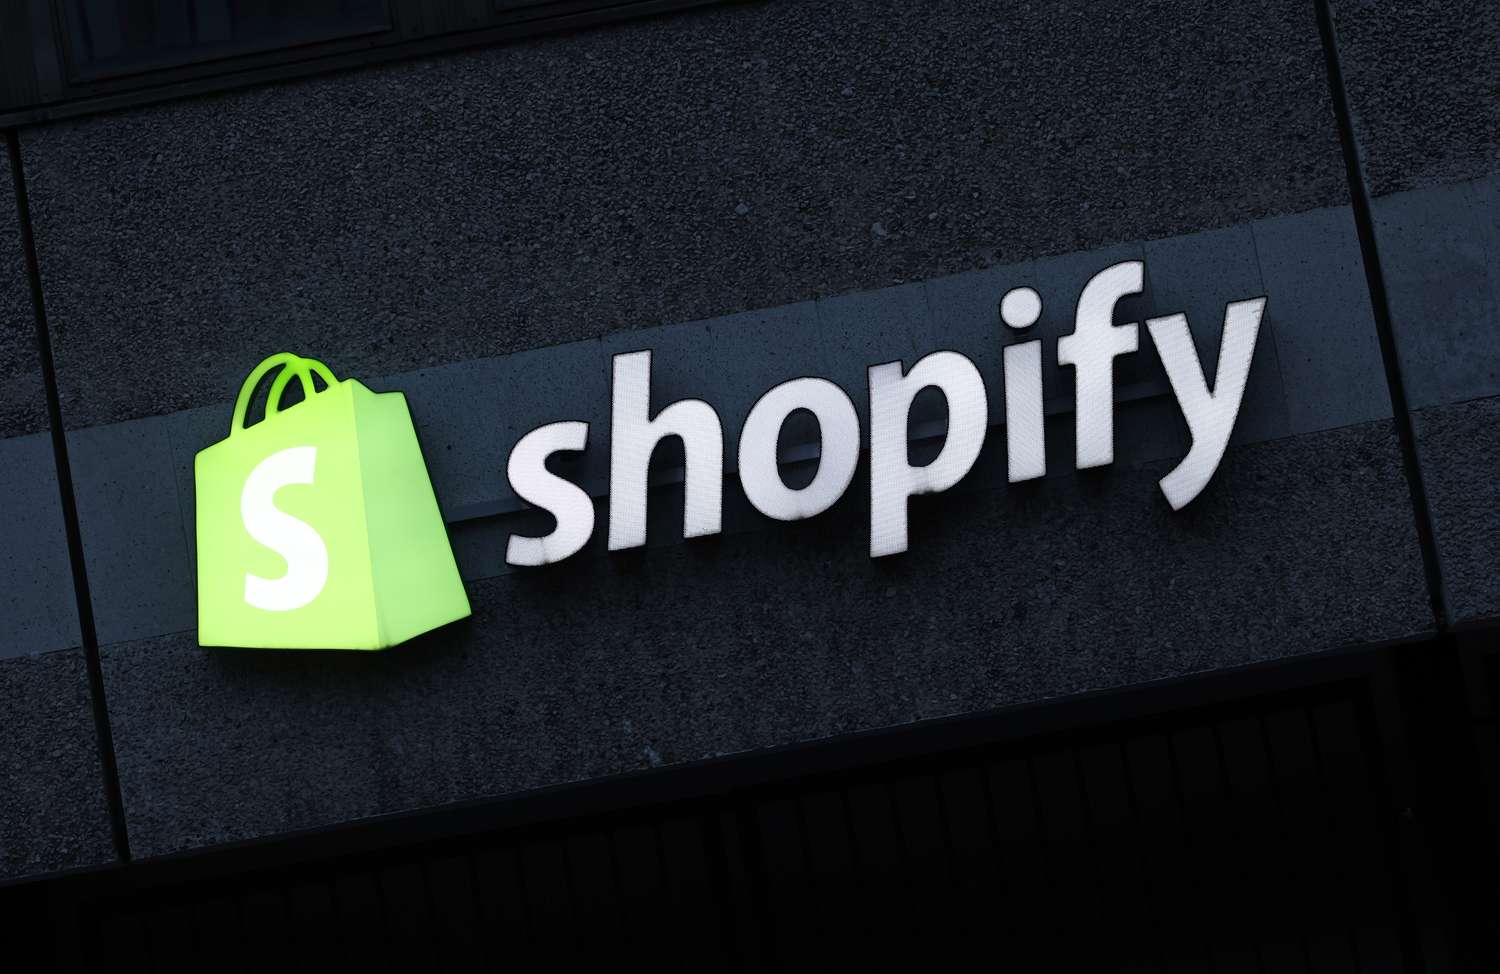 Shopify Stock Climbs After Bank of America Analysts Say It’s ‘Turning a Corner’ [Video]